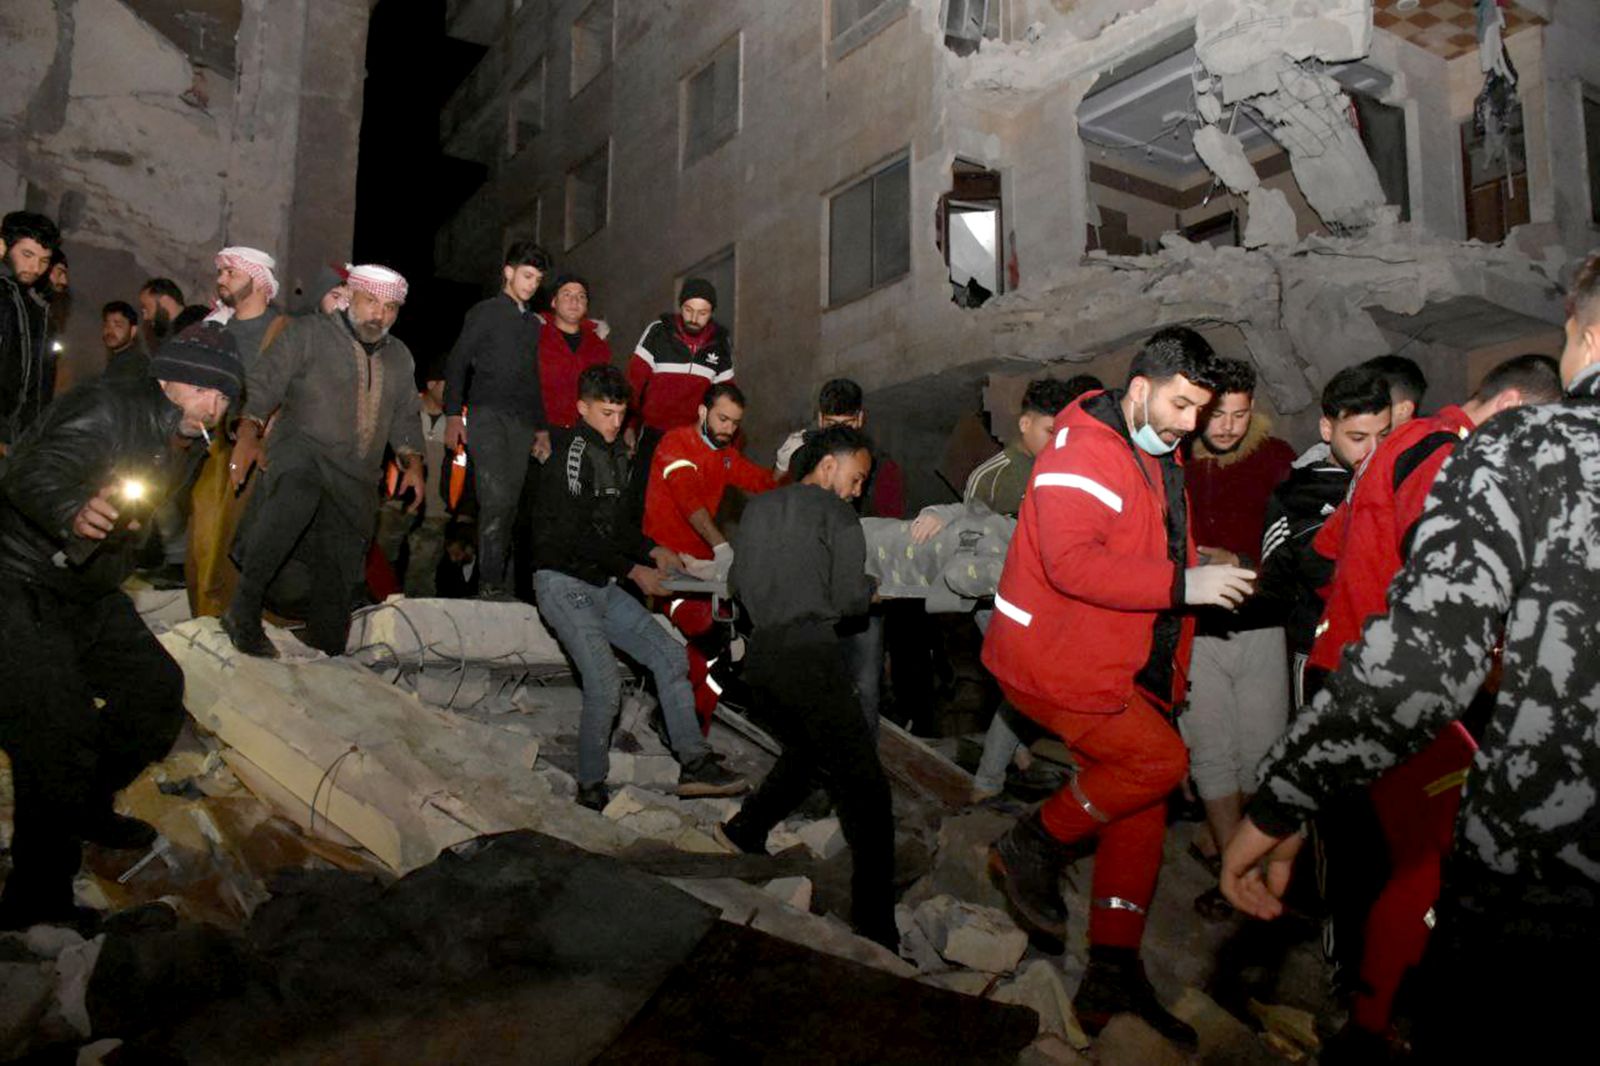 epa10450610 epa10450468 A handout photo made available by SANA shows rescue operations following the earthquake that affected Syria early morning, in the city of Hama, Syria 06 February 2023. According to the US Geological Service, an earthquake with a preliminary magnitude of 7.8 struck southern Turkey close to the Syrian border, causing buildings to collapse and sending shockwaves over northwest Syria, Cyprus, and Lebanon.  EPA/SANA  HANDOUT EDITORIAL USE ONLY/NO SALES